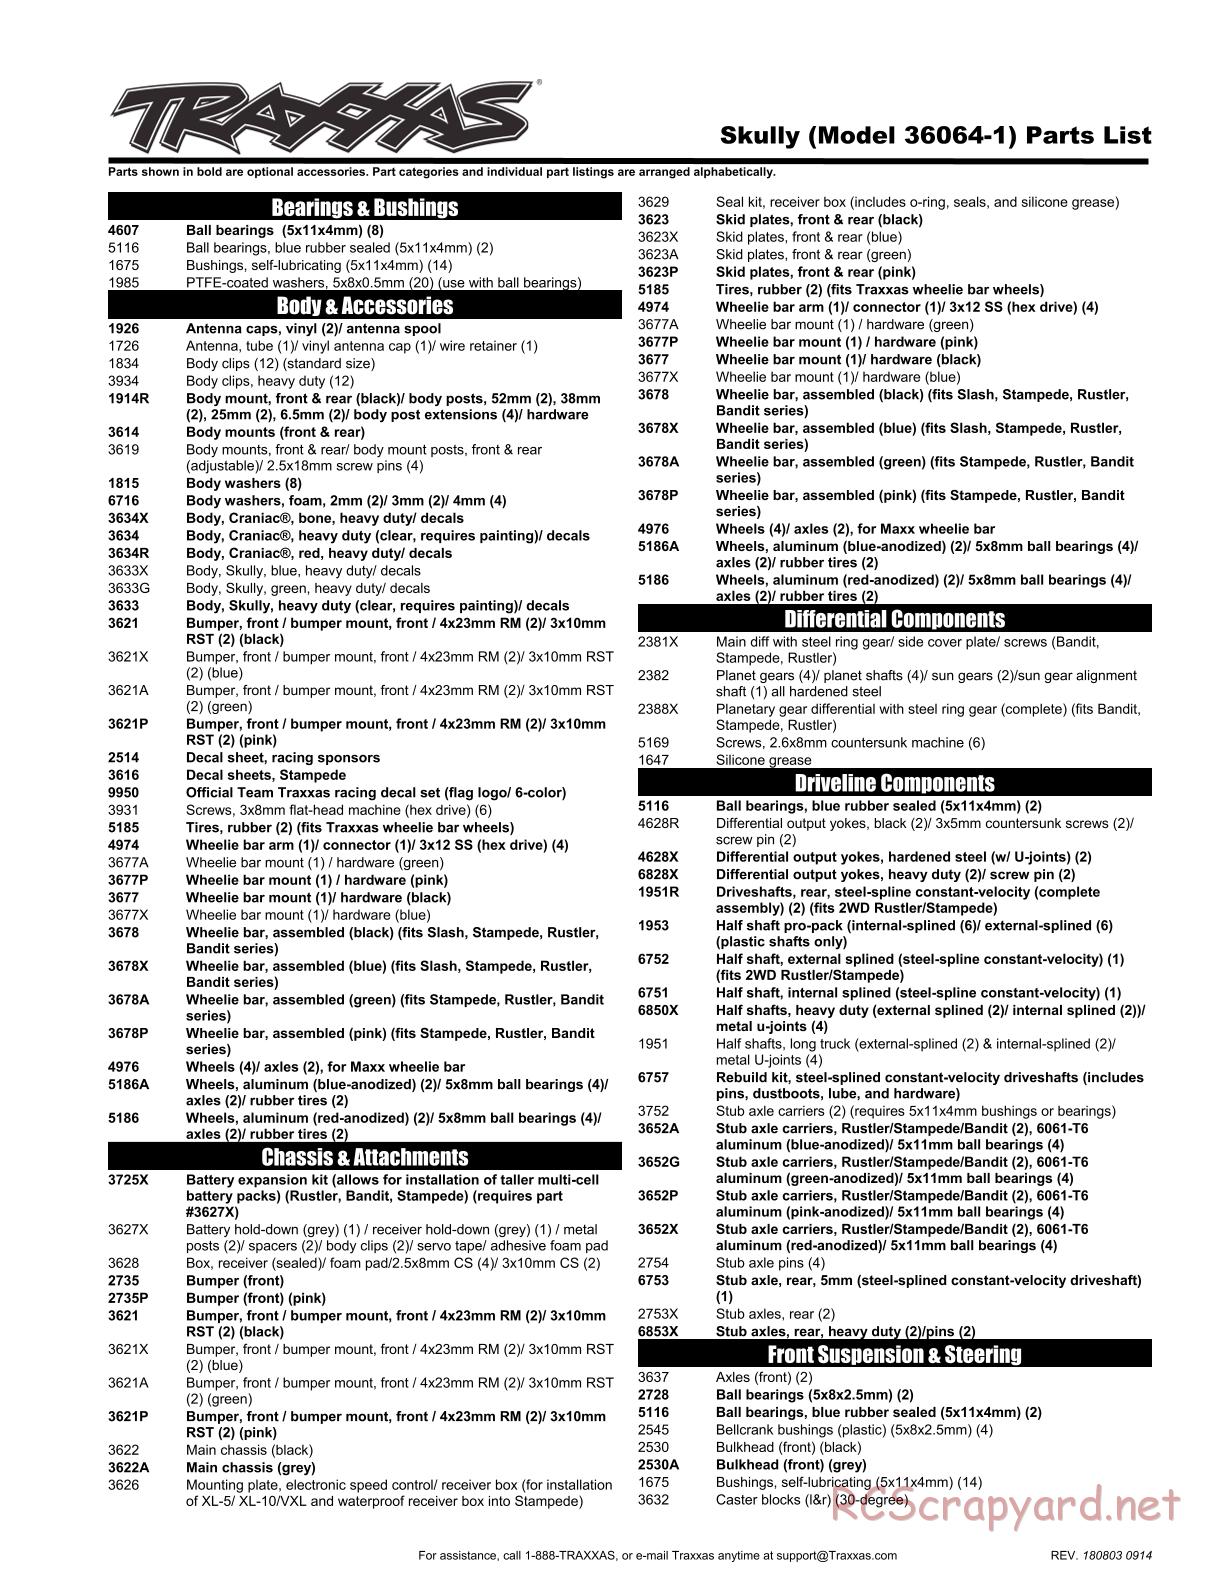 Traxxas - Skully - Parts List - Page 1